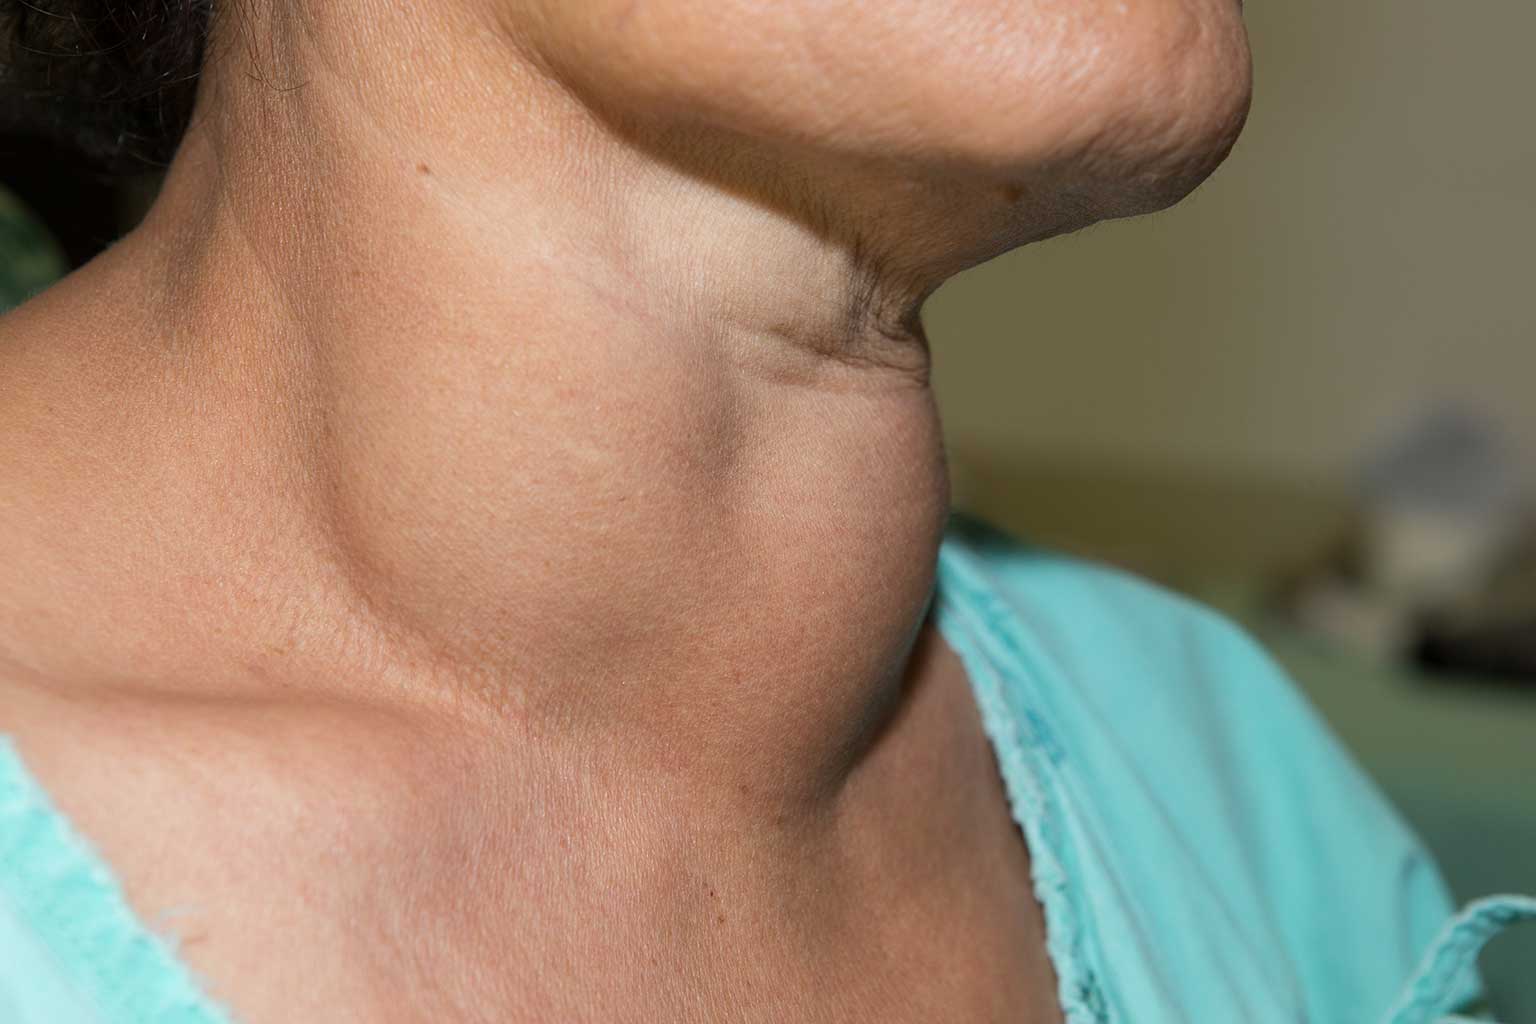 Thyroid: Women Should Take Care Of Them